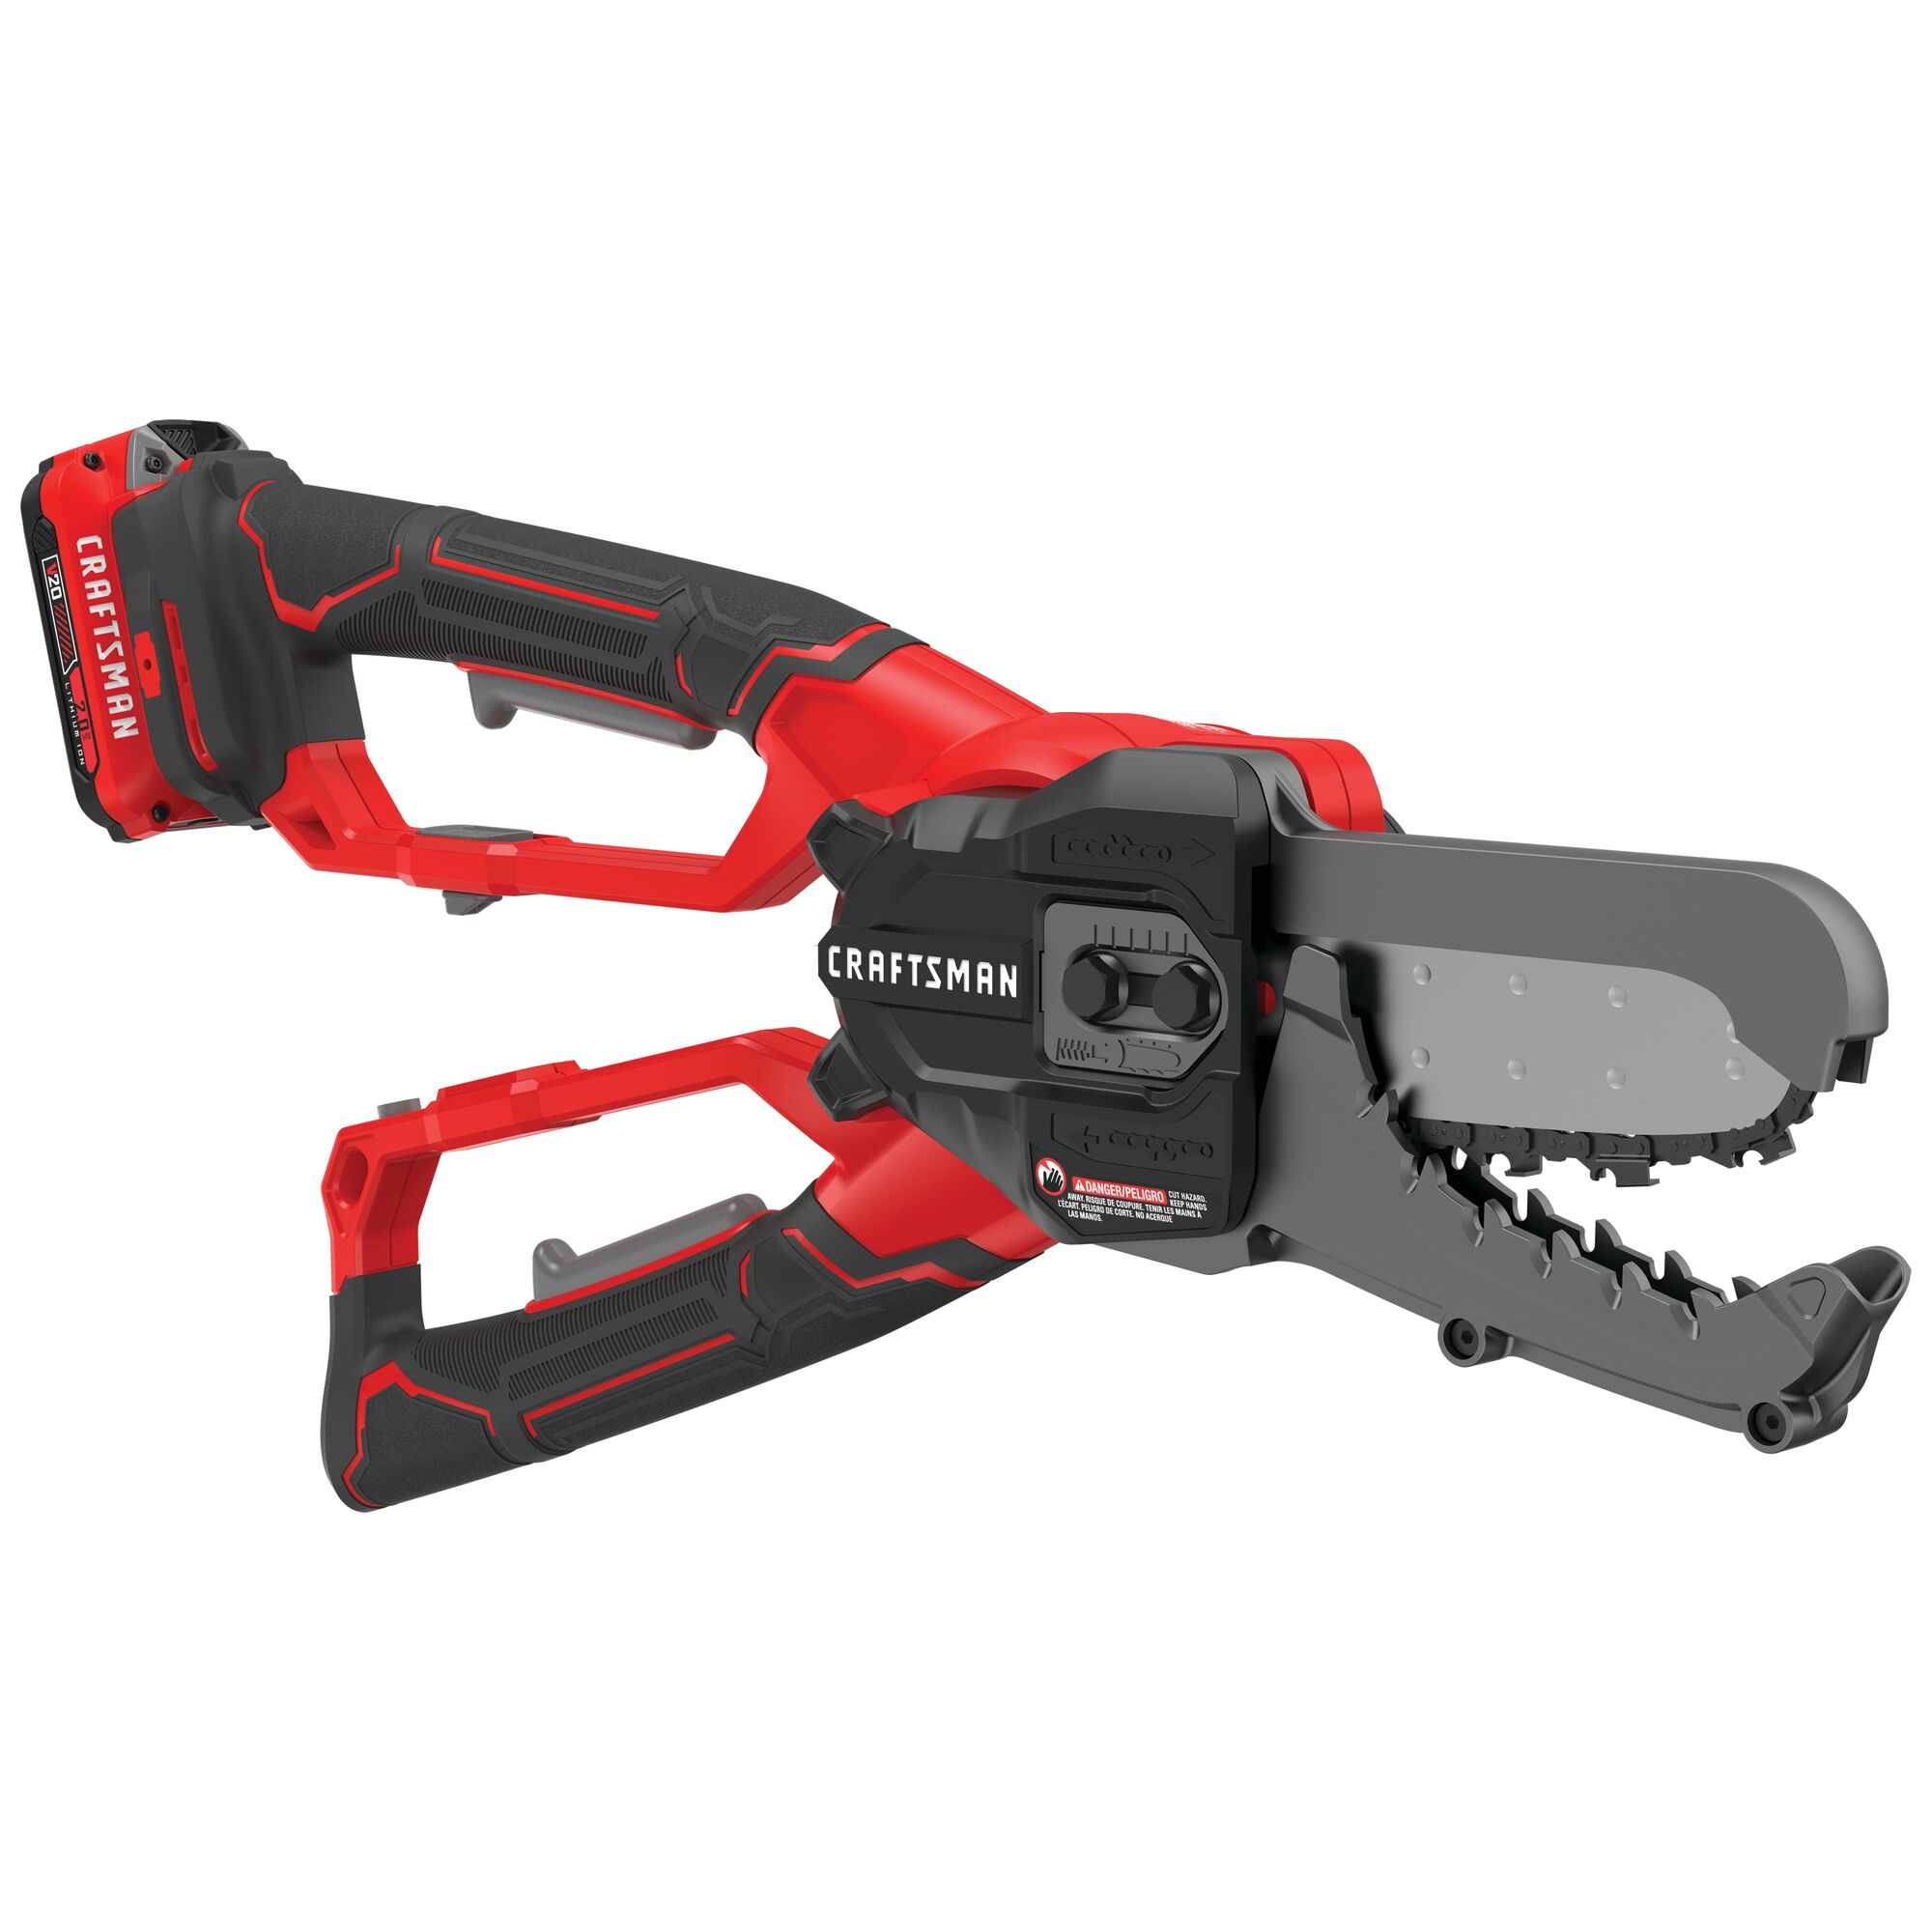 6 inch cordless compact chainsaw lopper kit 2 amp hour.